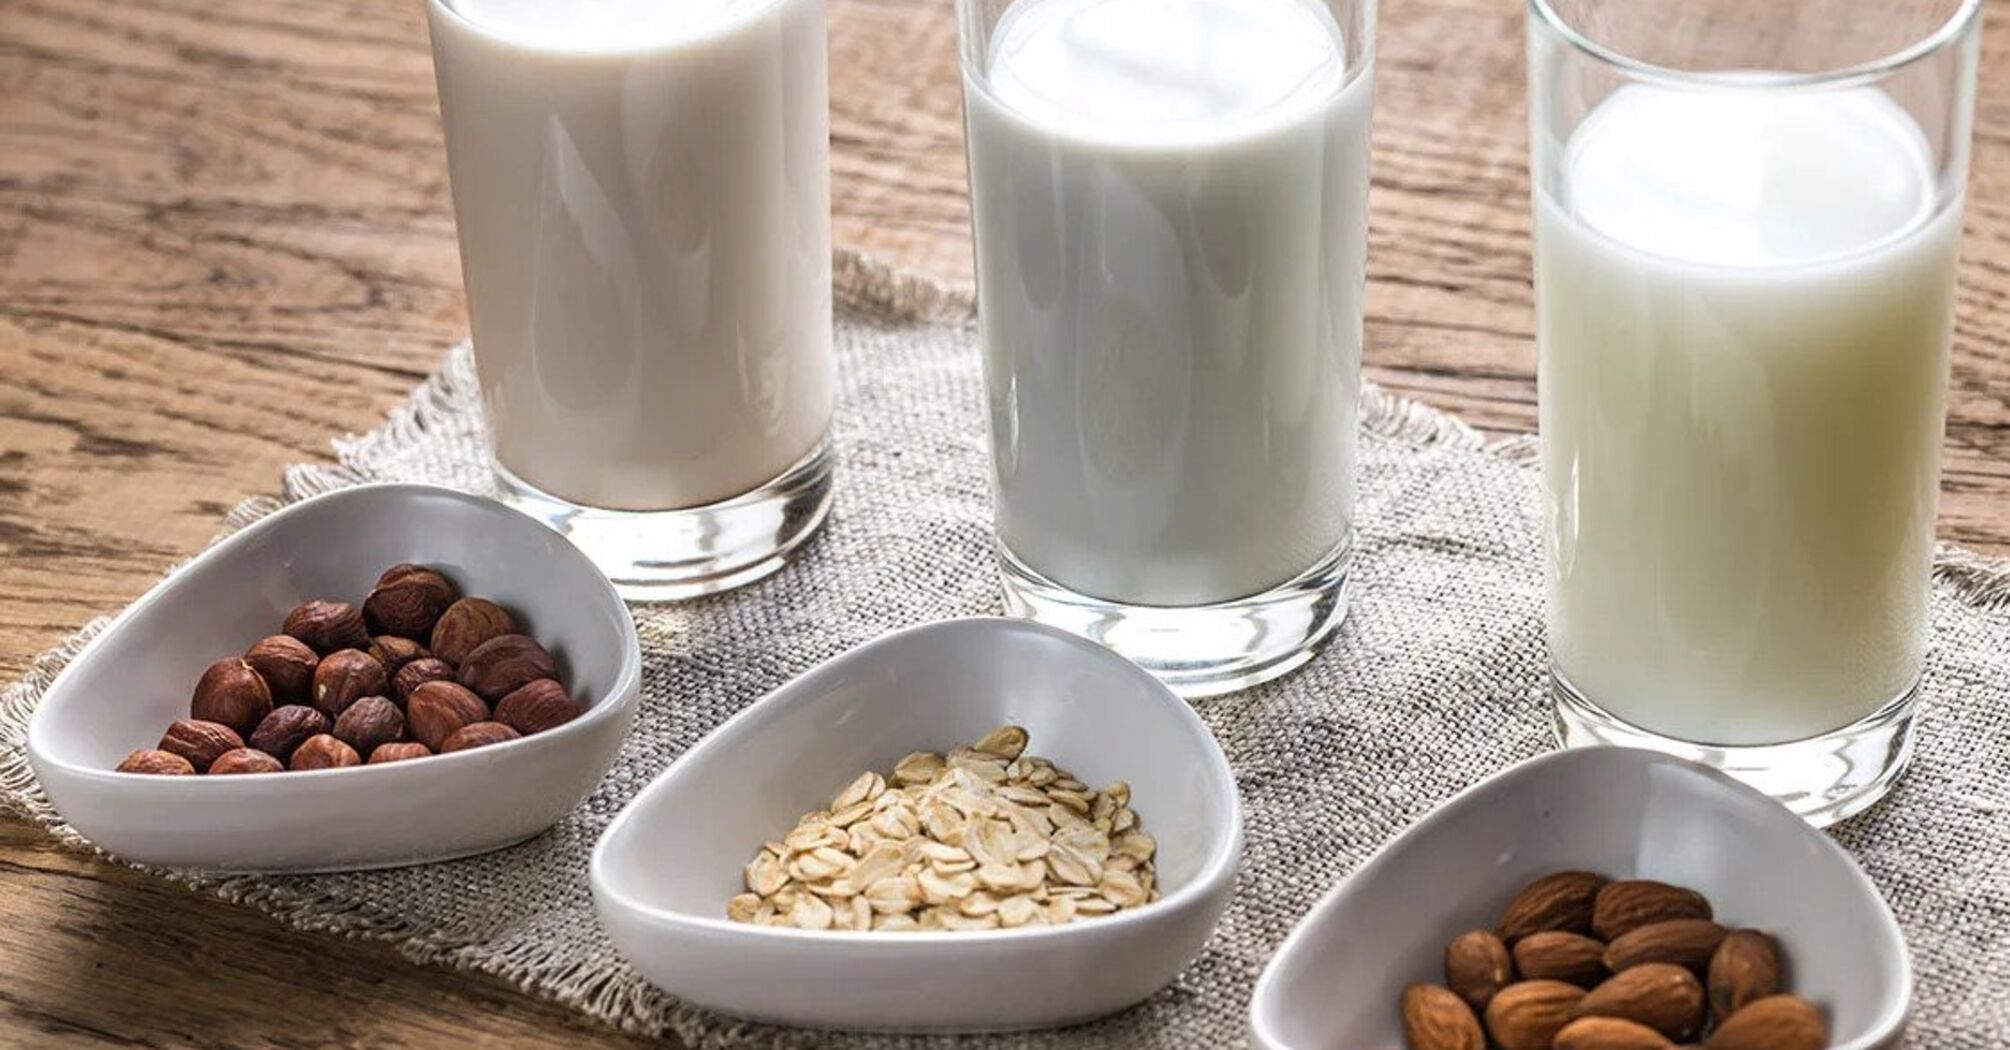 How to make plant milk based on nuts and grains